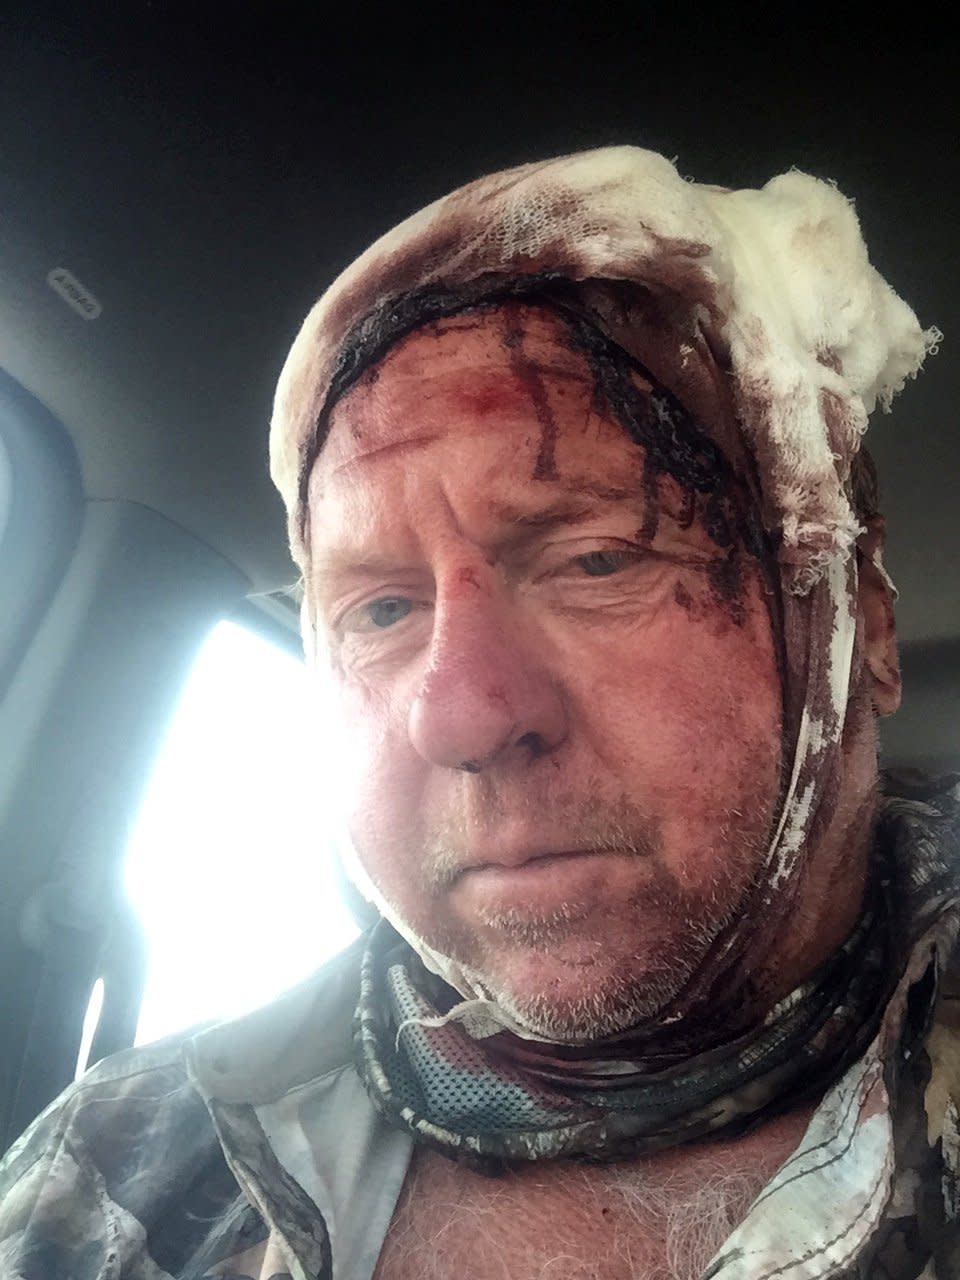 Tom Sommer after a grizzly bear mauled him on Sept. 4, 2017, in southwestern Montana.